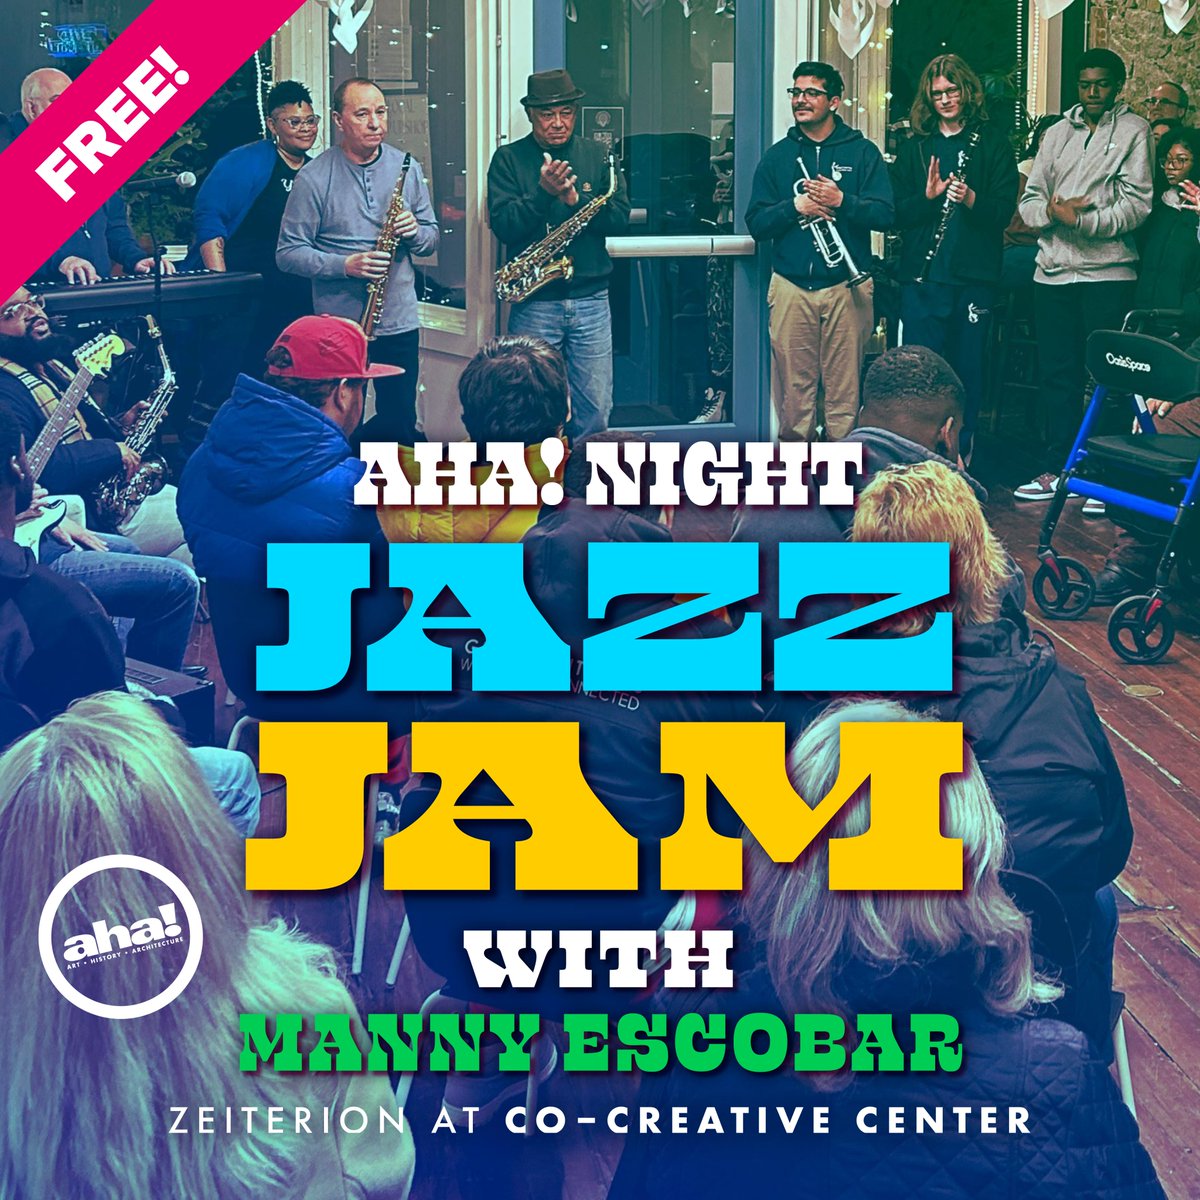 NEXT MONTH Jazz Jam with Emmanuel Escobar is back as part of AHA Night! No prior jam experience or tickets necessary. Audience members are welcome! Thursday, June 13 from 6-7PM at Co-Creative Center New Bedford. For more information, visit: bit.ly/3wIGZLQ